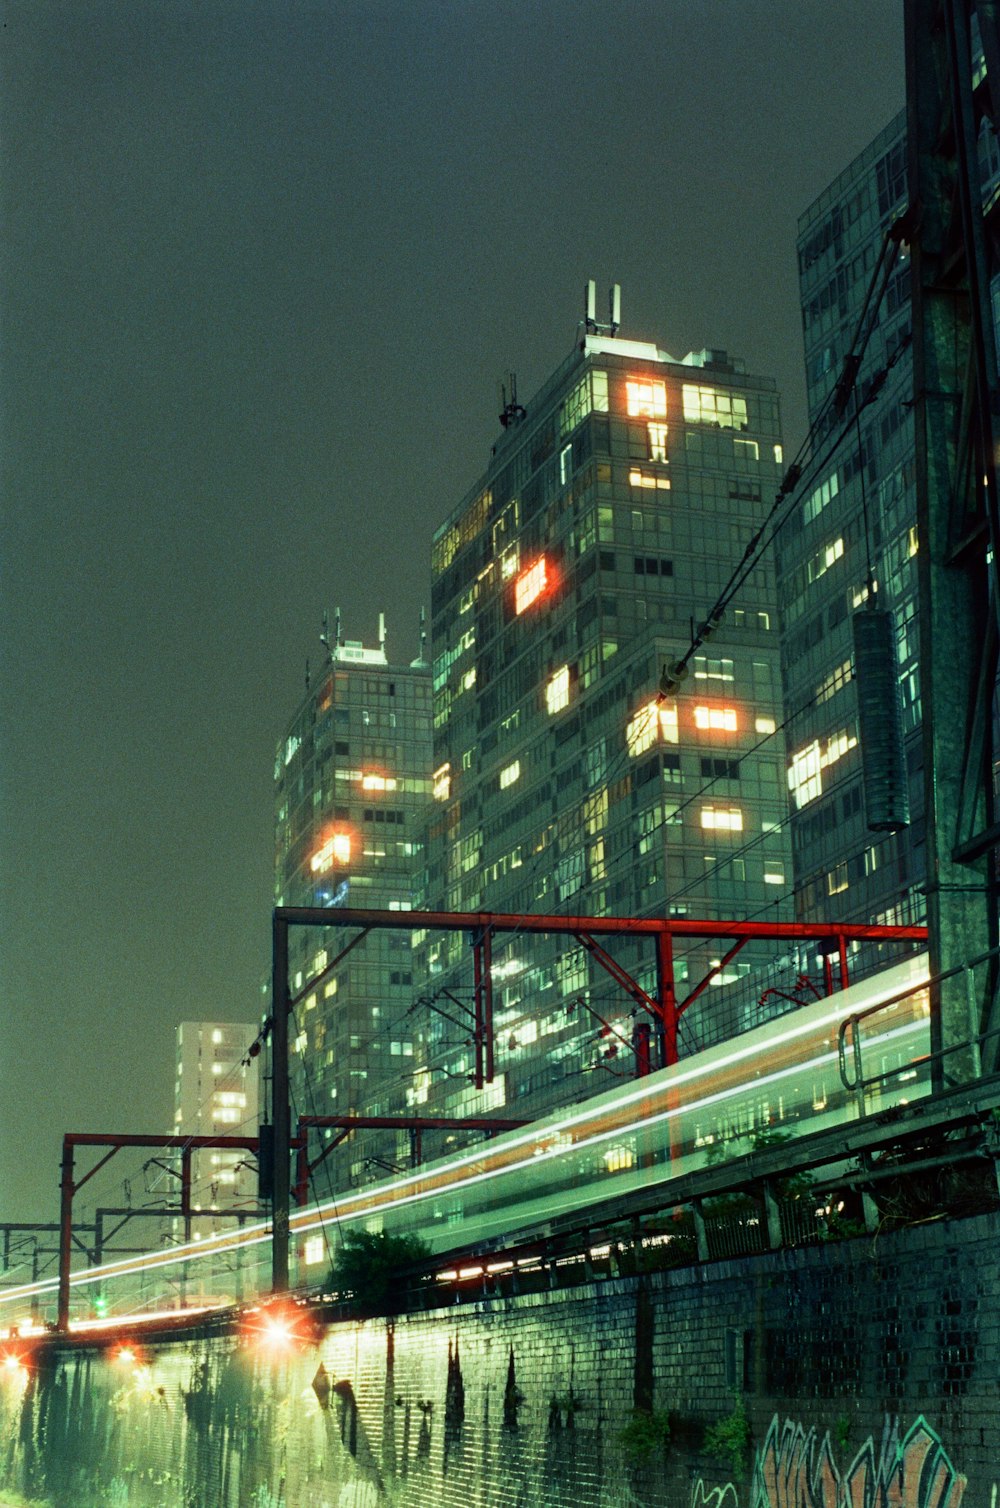 a train passing by a city at night